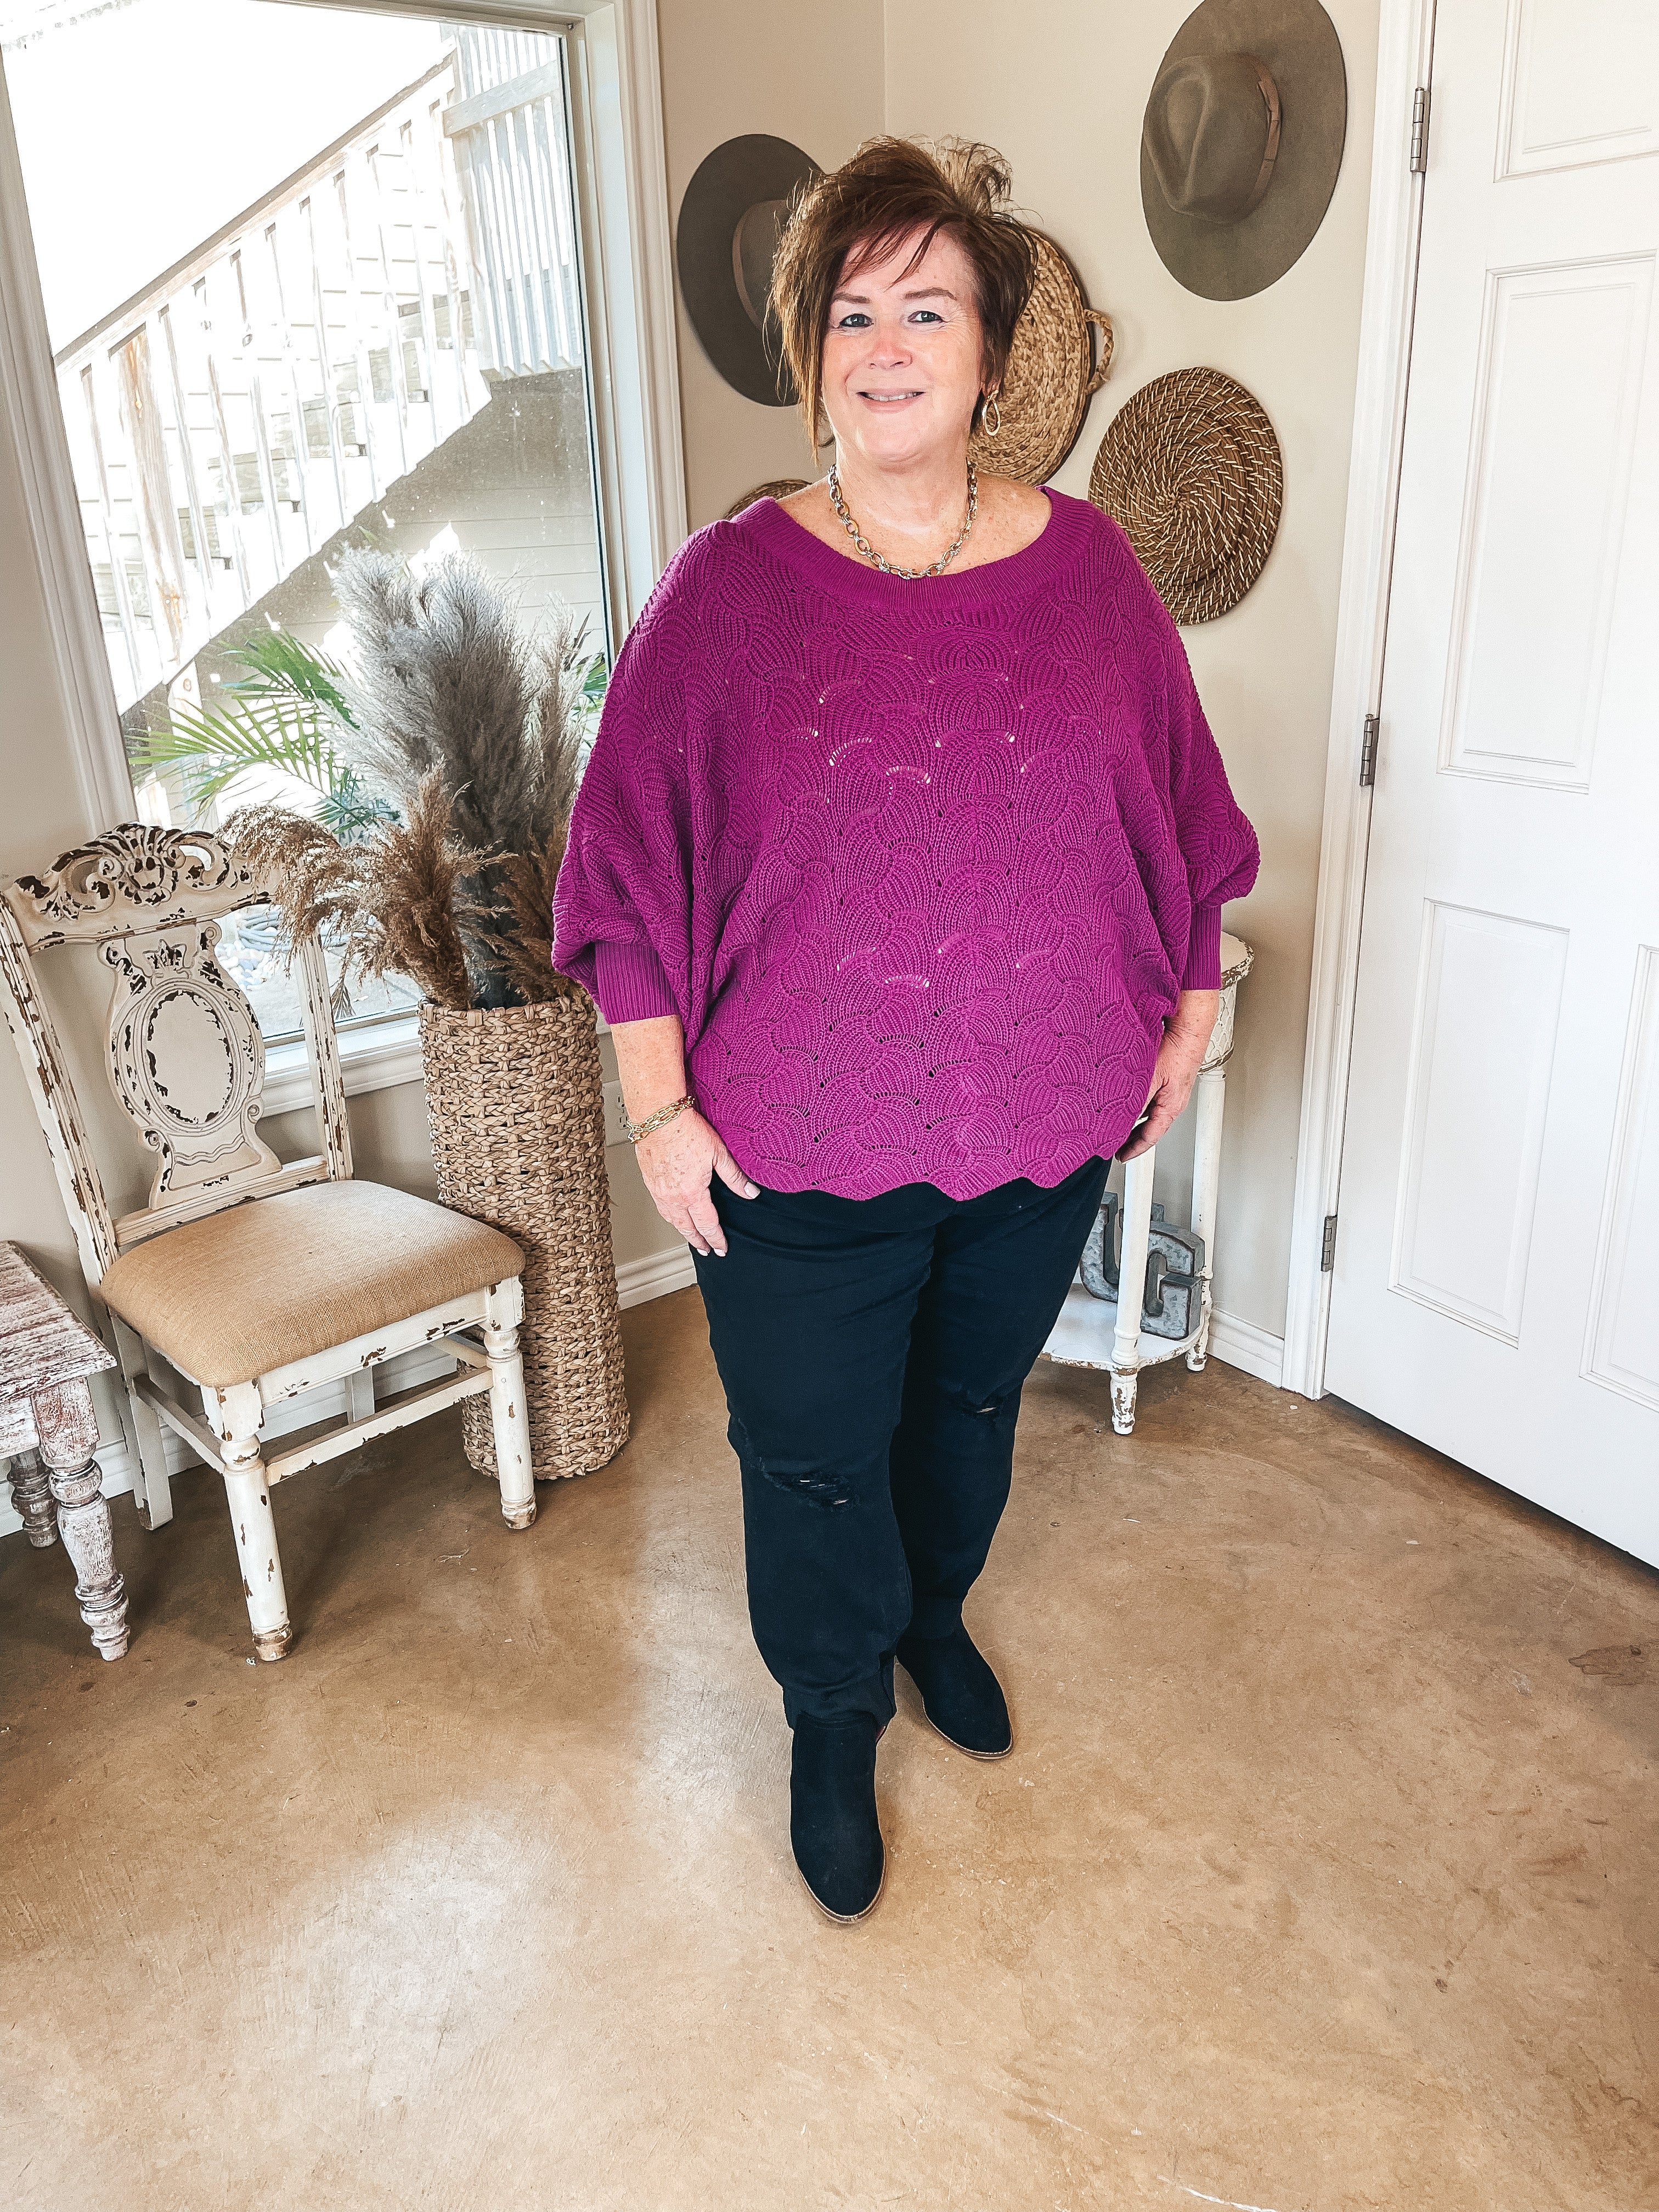 So Agreeable Knit Dolman Sweater with Scalloped Hemline in Magenta - Giddy Up Glamour Boutique